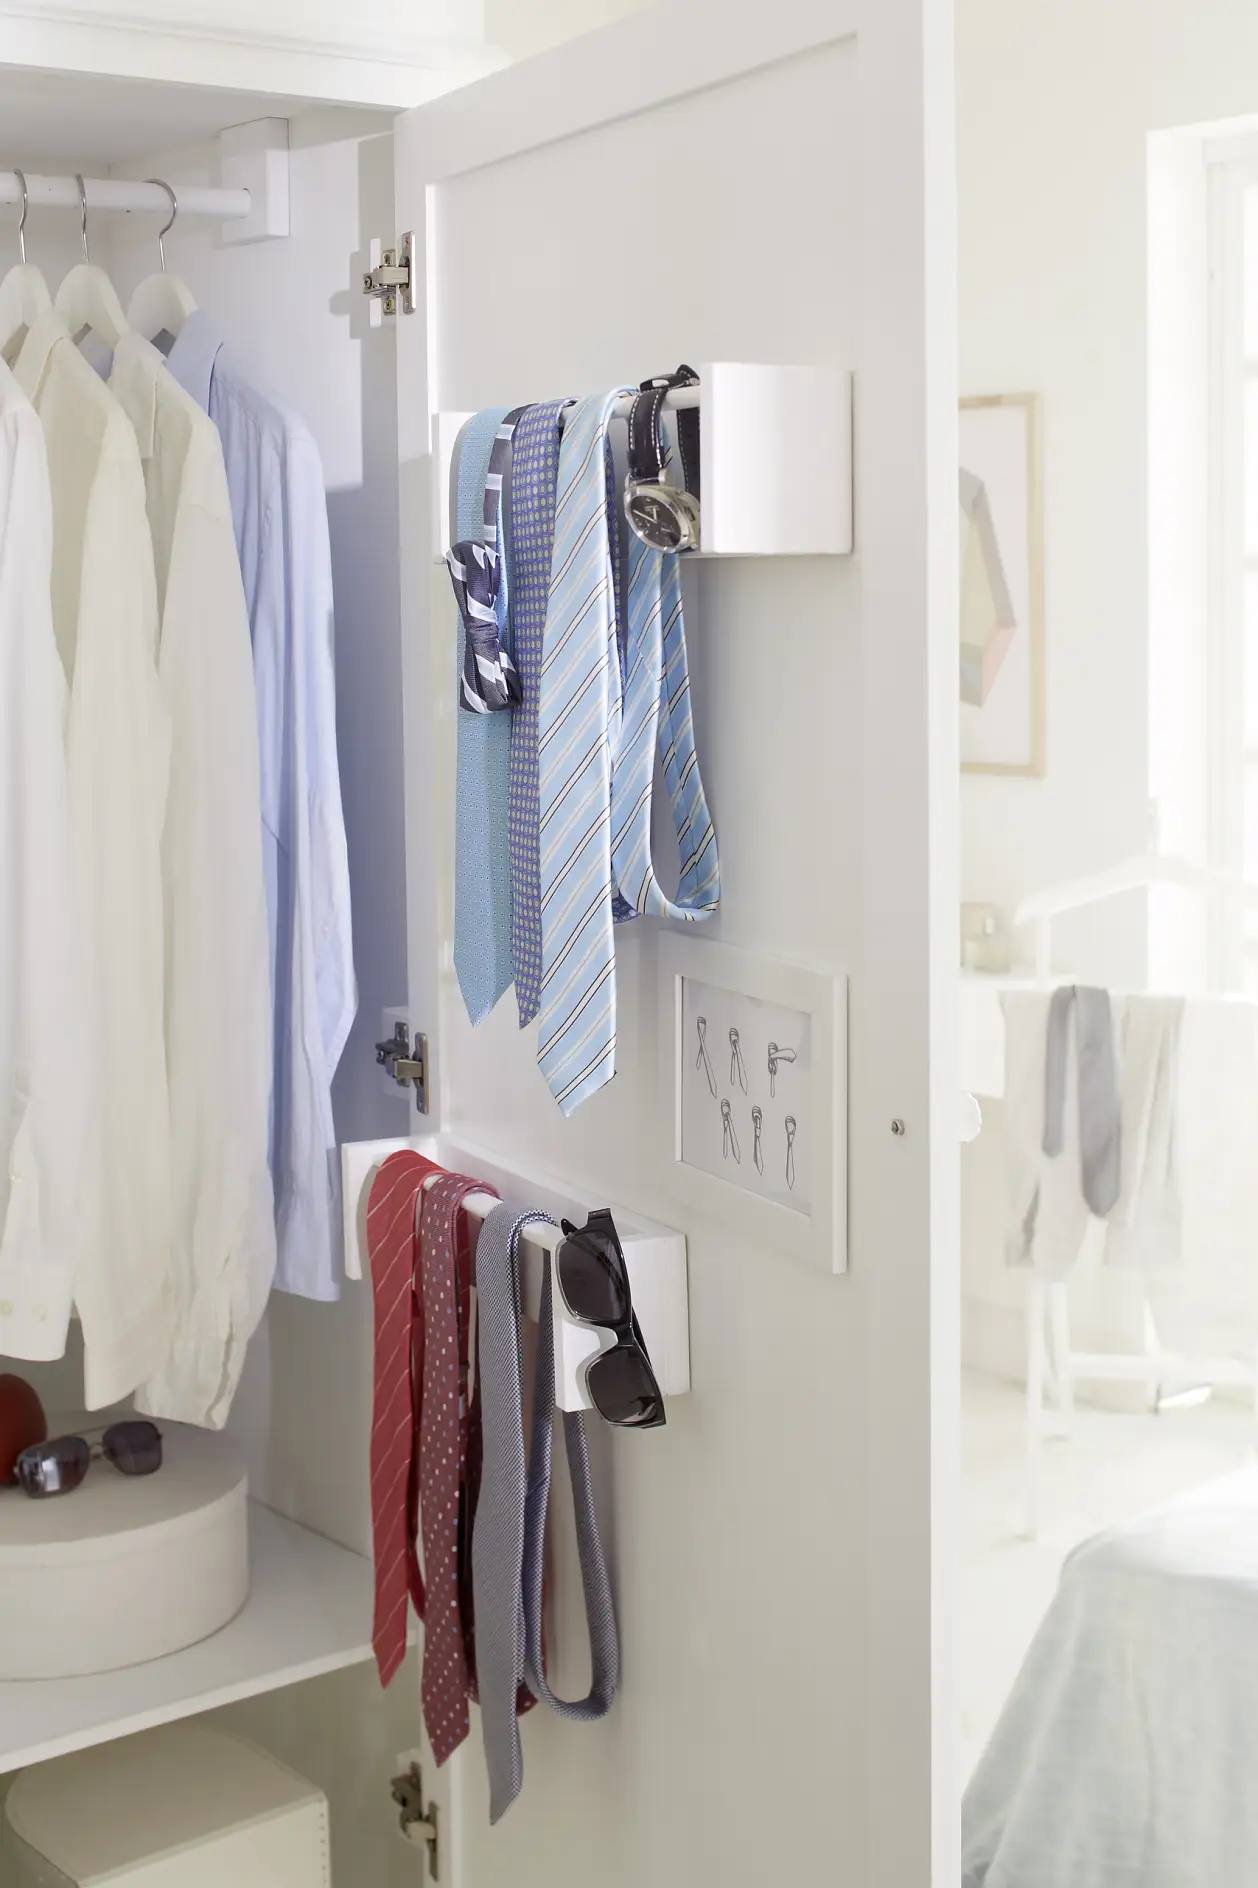 Too many ties and nowhere to hang them? No problem. Why not convert a spice rack into a handy tie rack? It's quick and easy to make and held securely in place wtih tesa Powerbond® INDOOR.